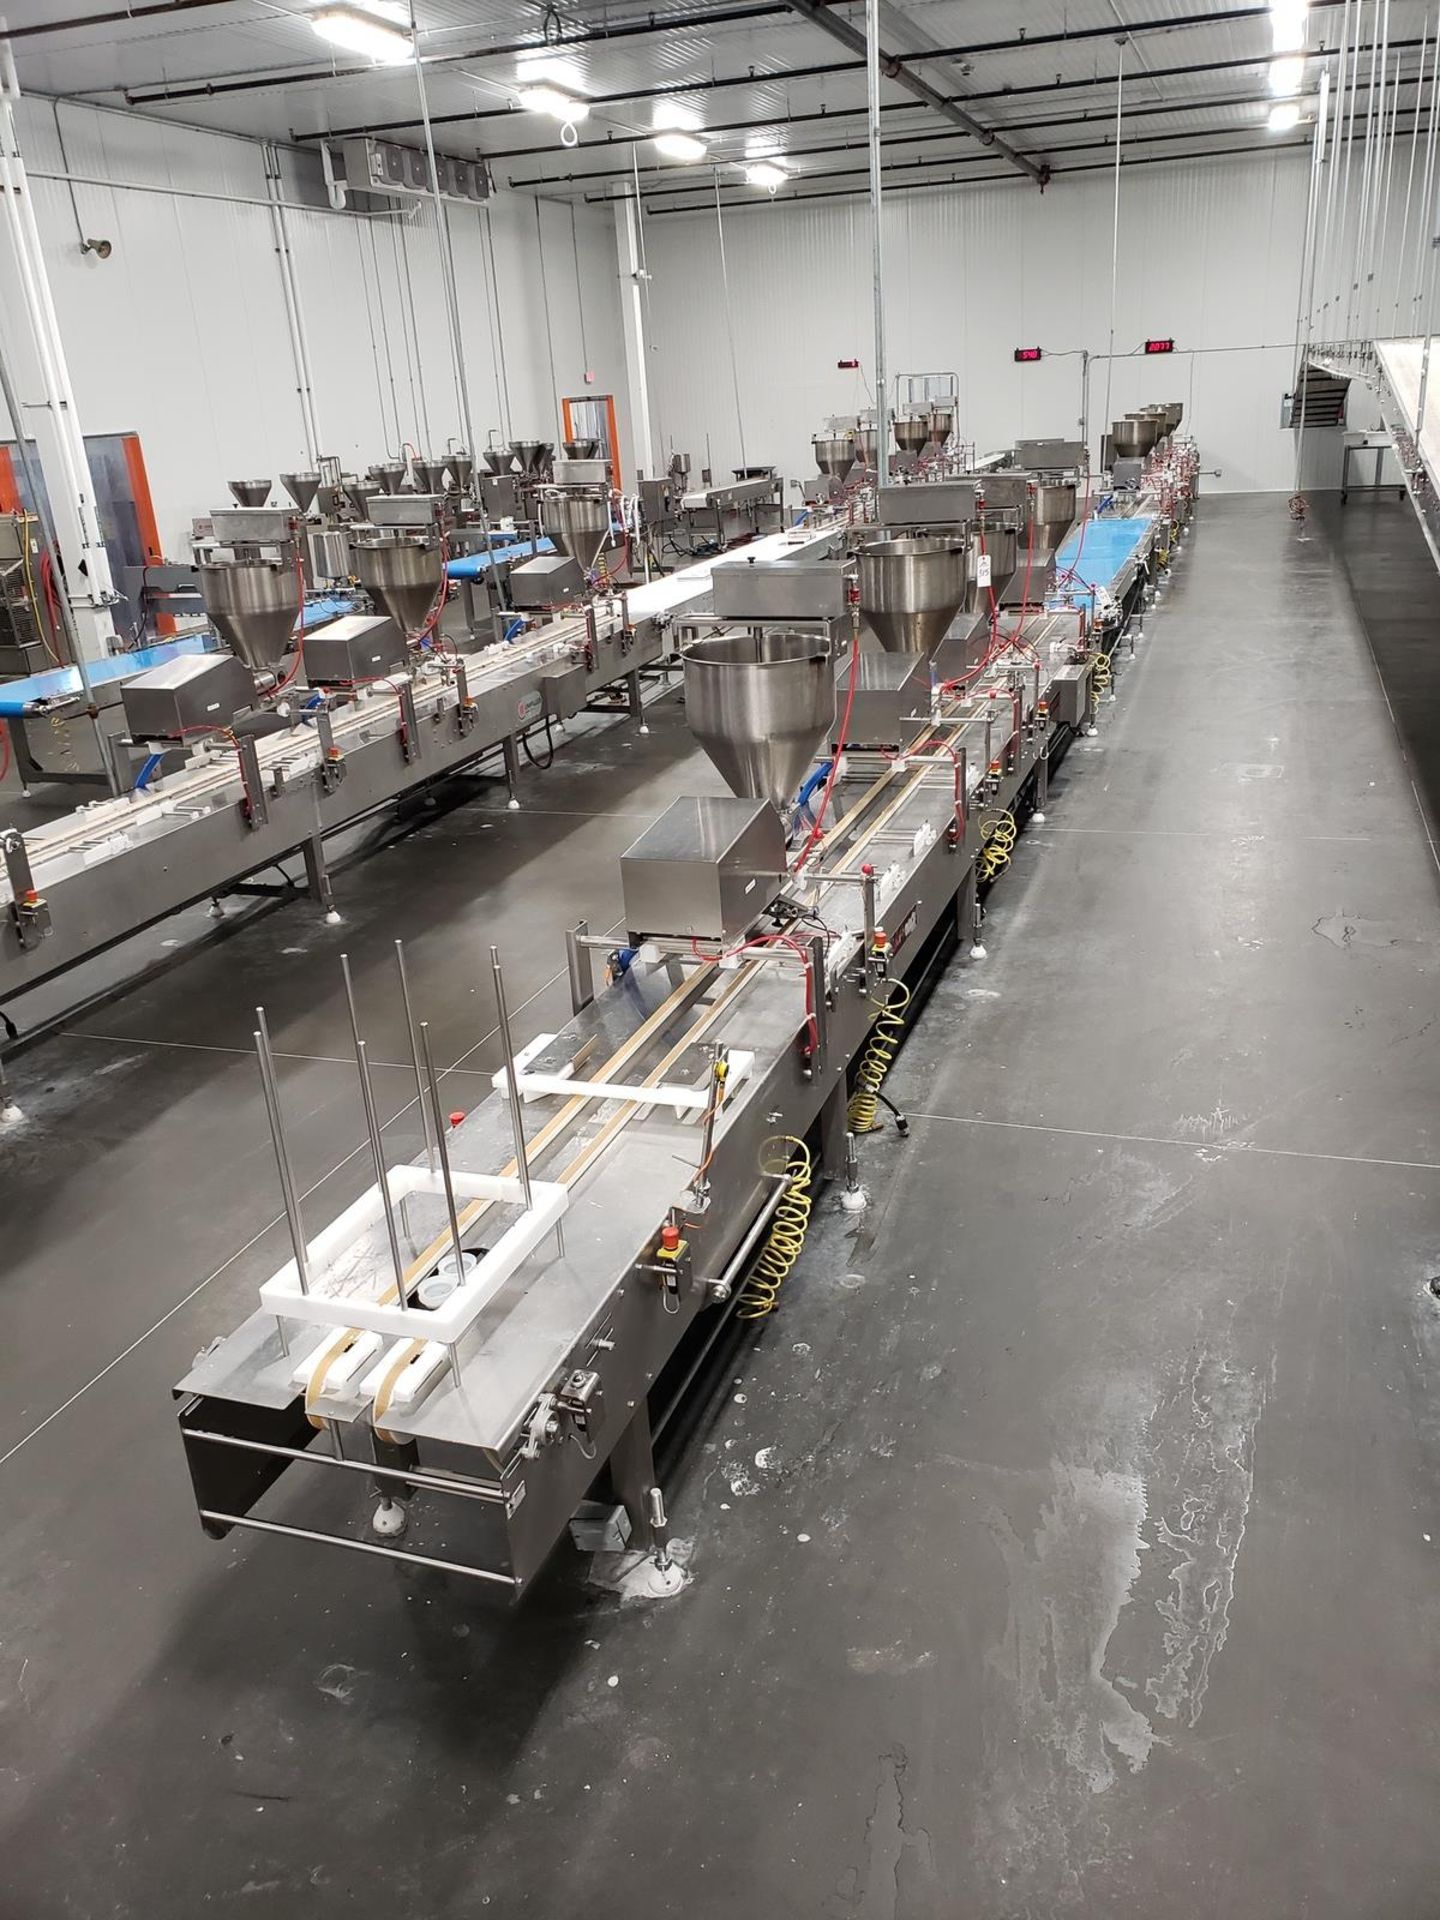 (Bulk Bid) 2019 Unifiller Sheet Cake Decorating Line, Includes Lots 315 - 318 - Subject to Piecemeal